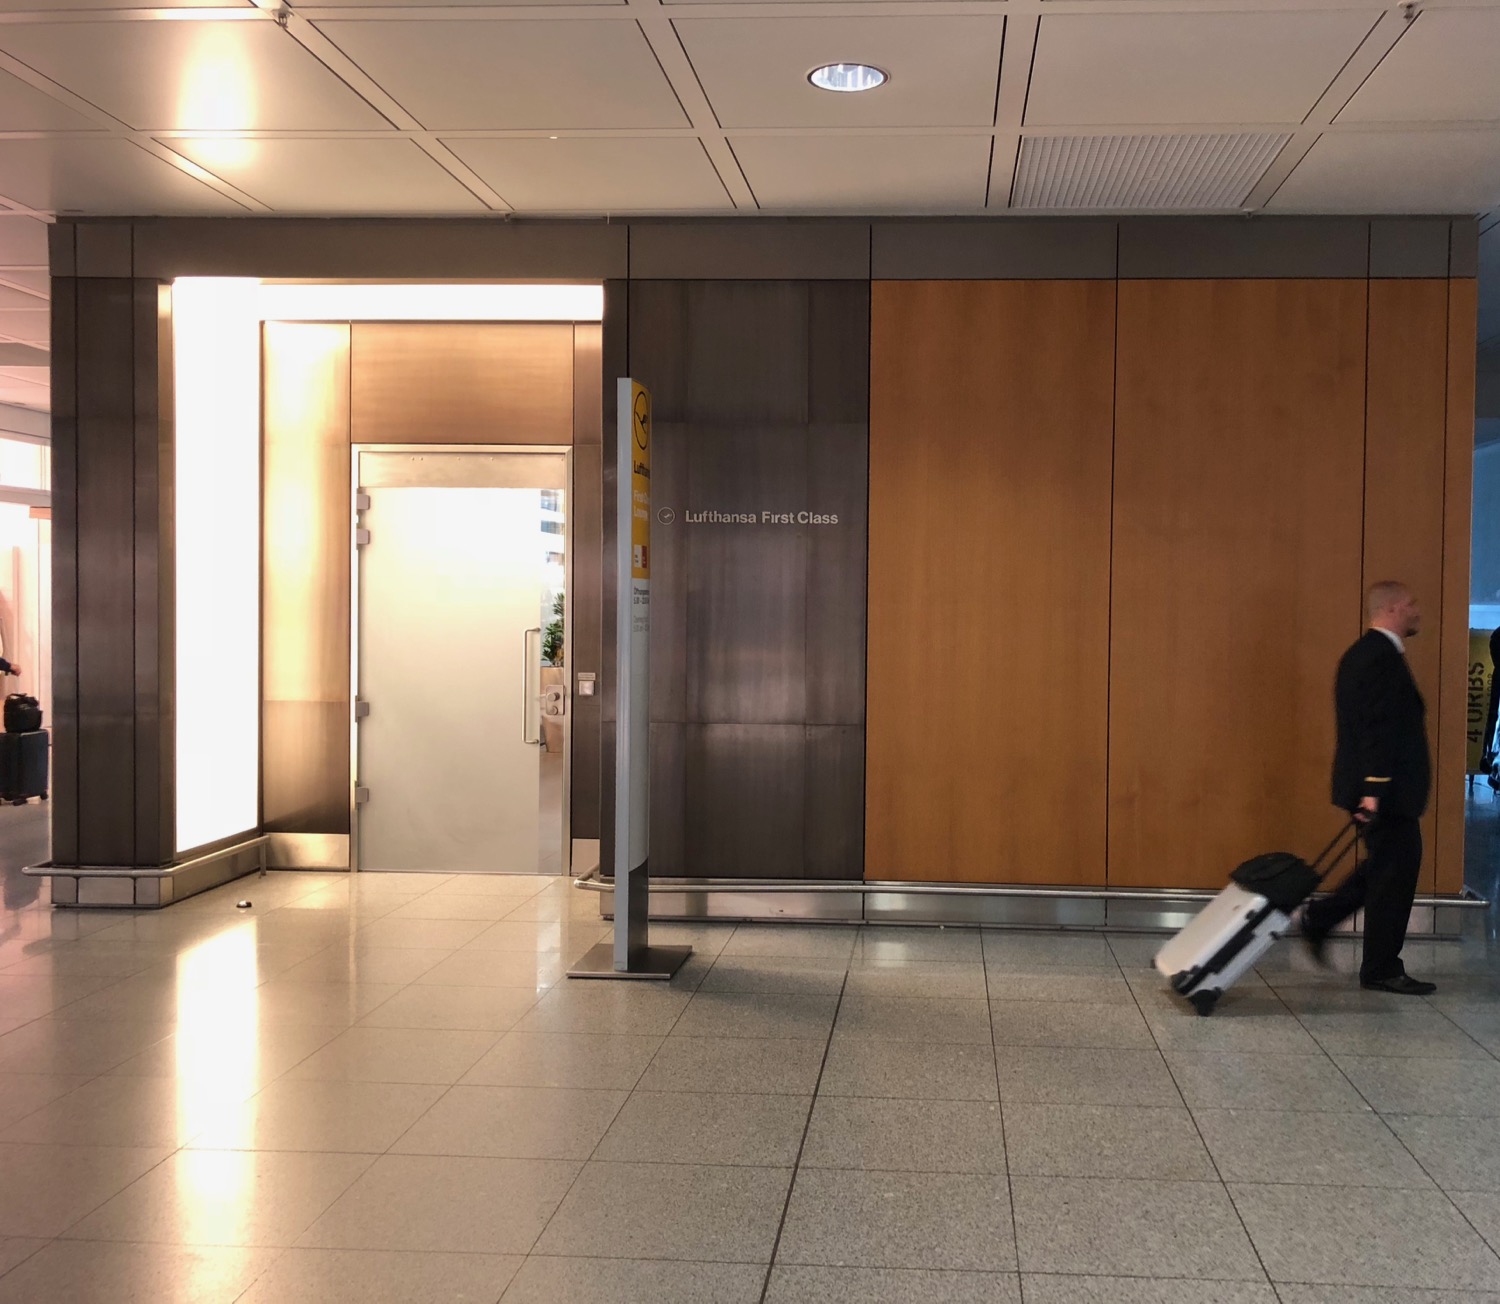 a man with luggage in a lobby